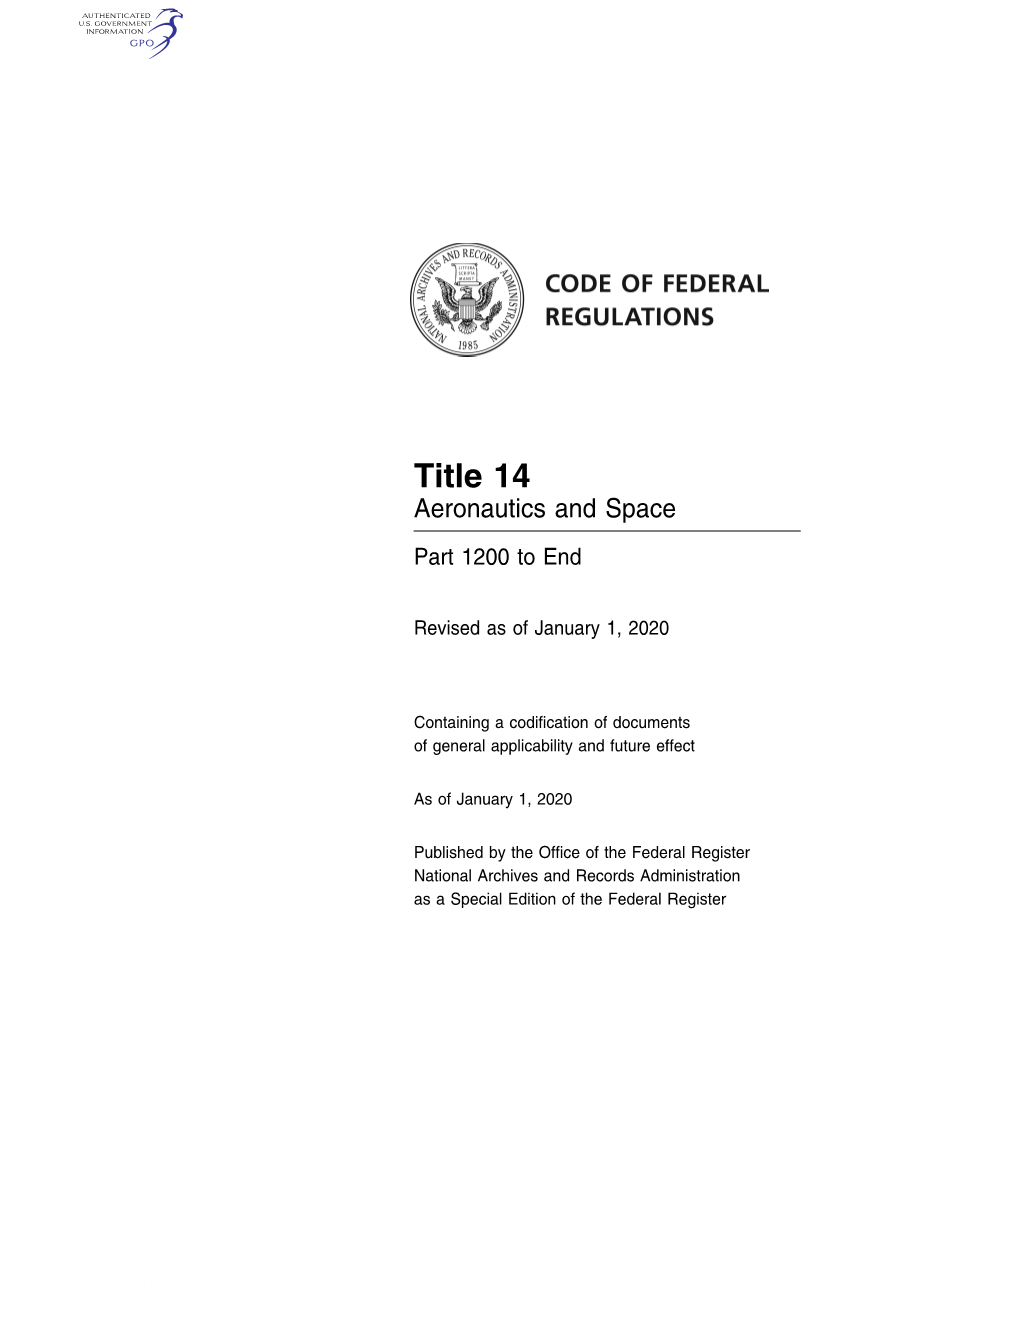 Title 14 Aeronautics and Space Part 1200 to End